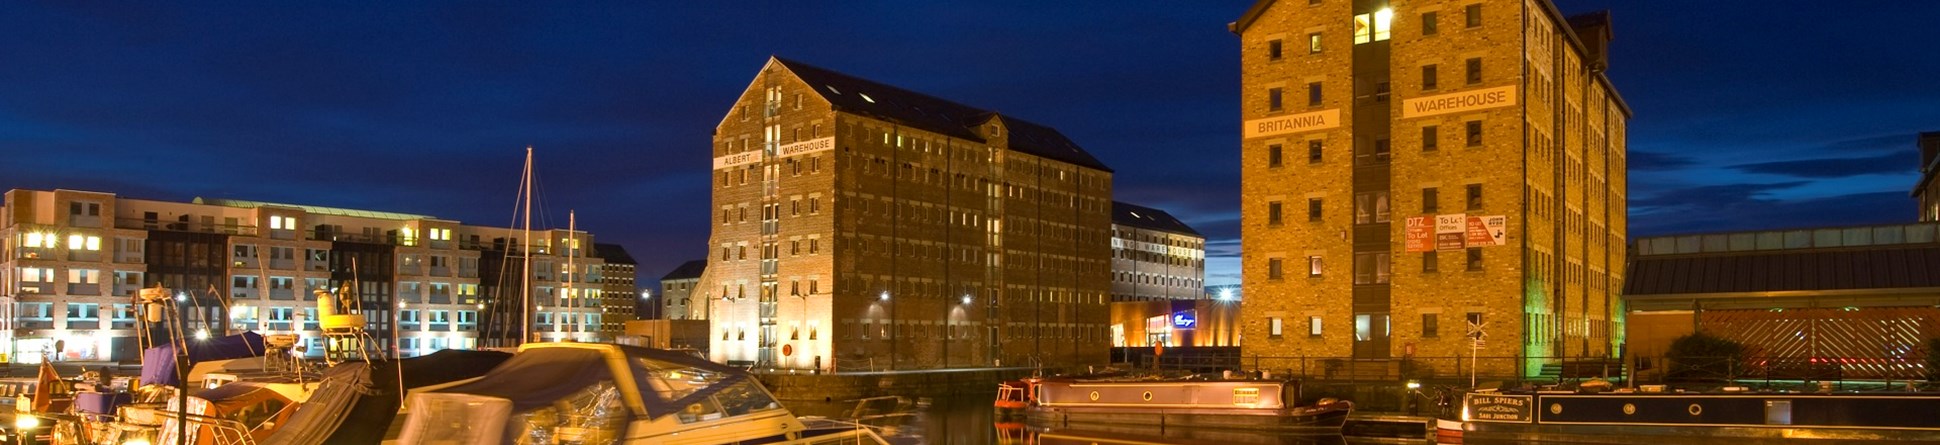 Night-time at Gloucester docks. The street lights pick out boats in the foreground. Converted warehouses stand in the background.